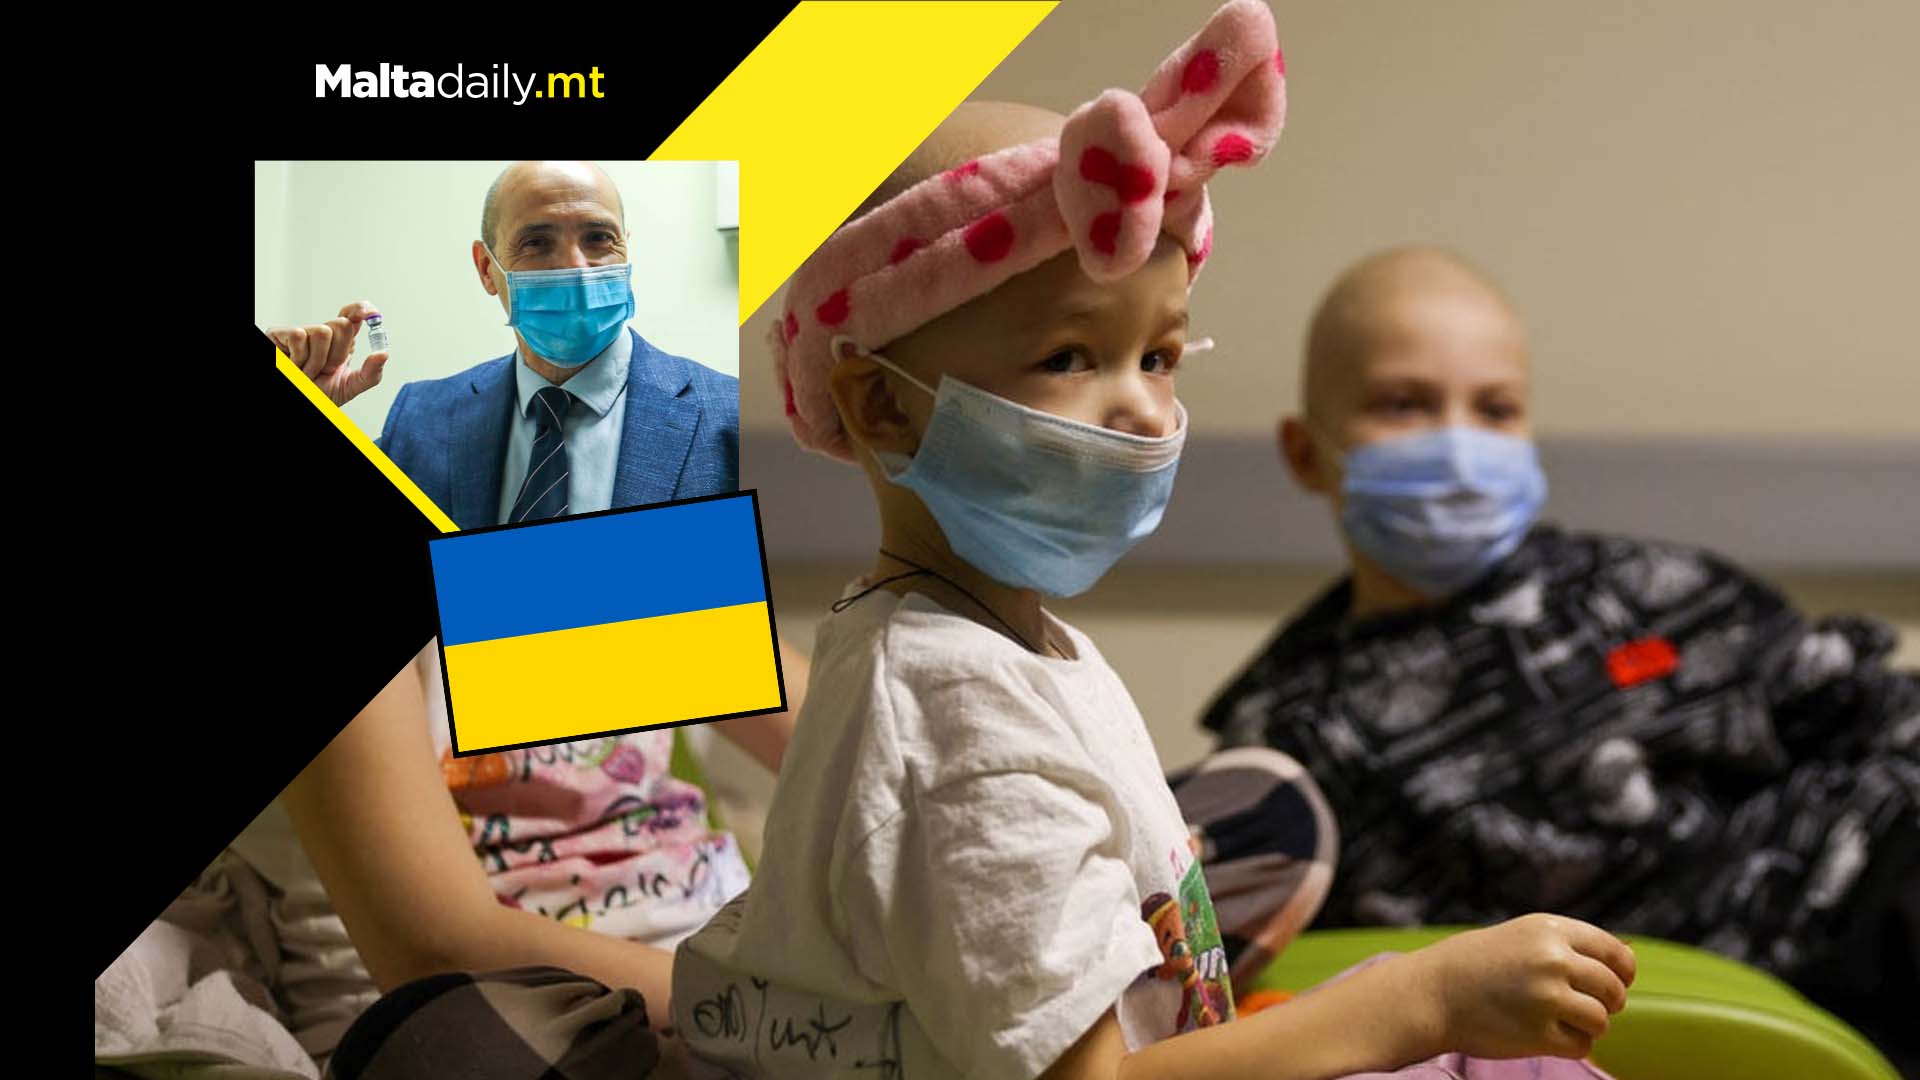 6-year-old Ukrainian cancer patient in Malta to continue treatment